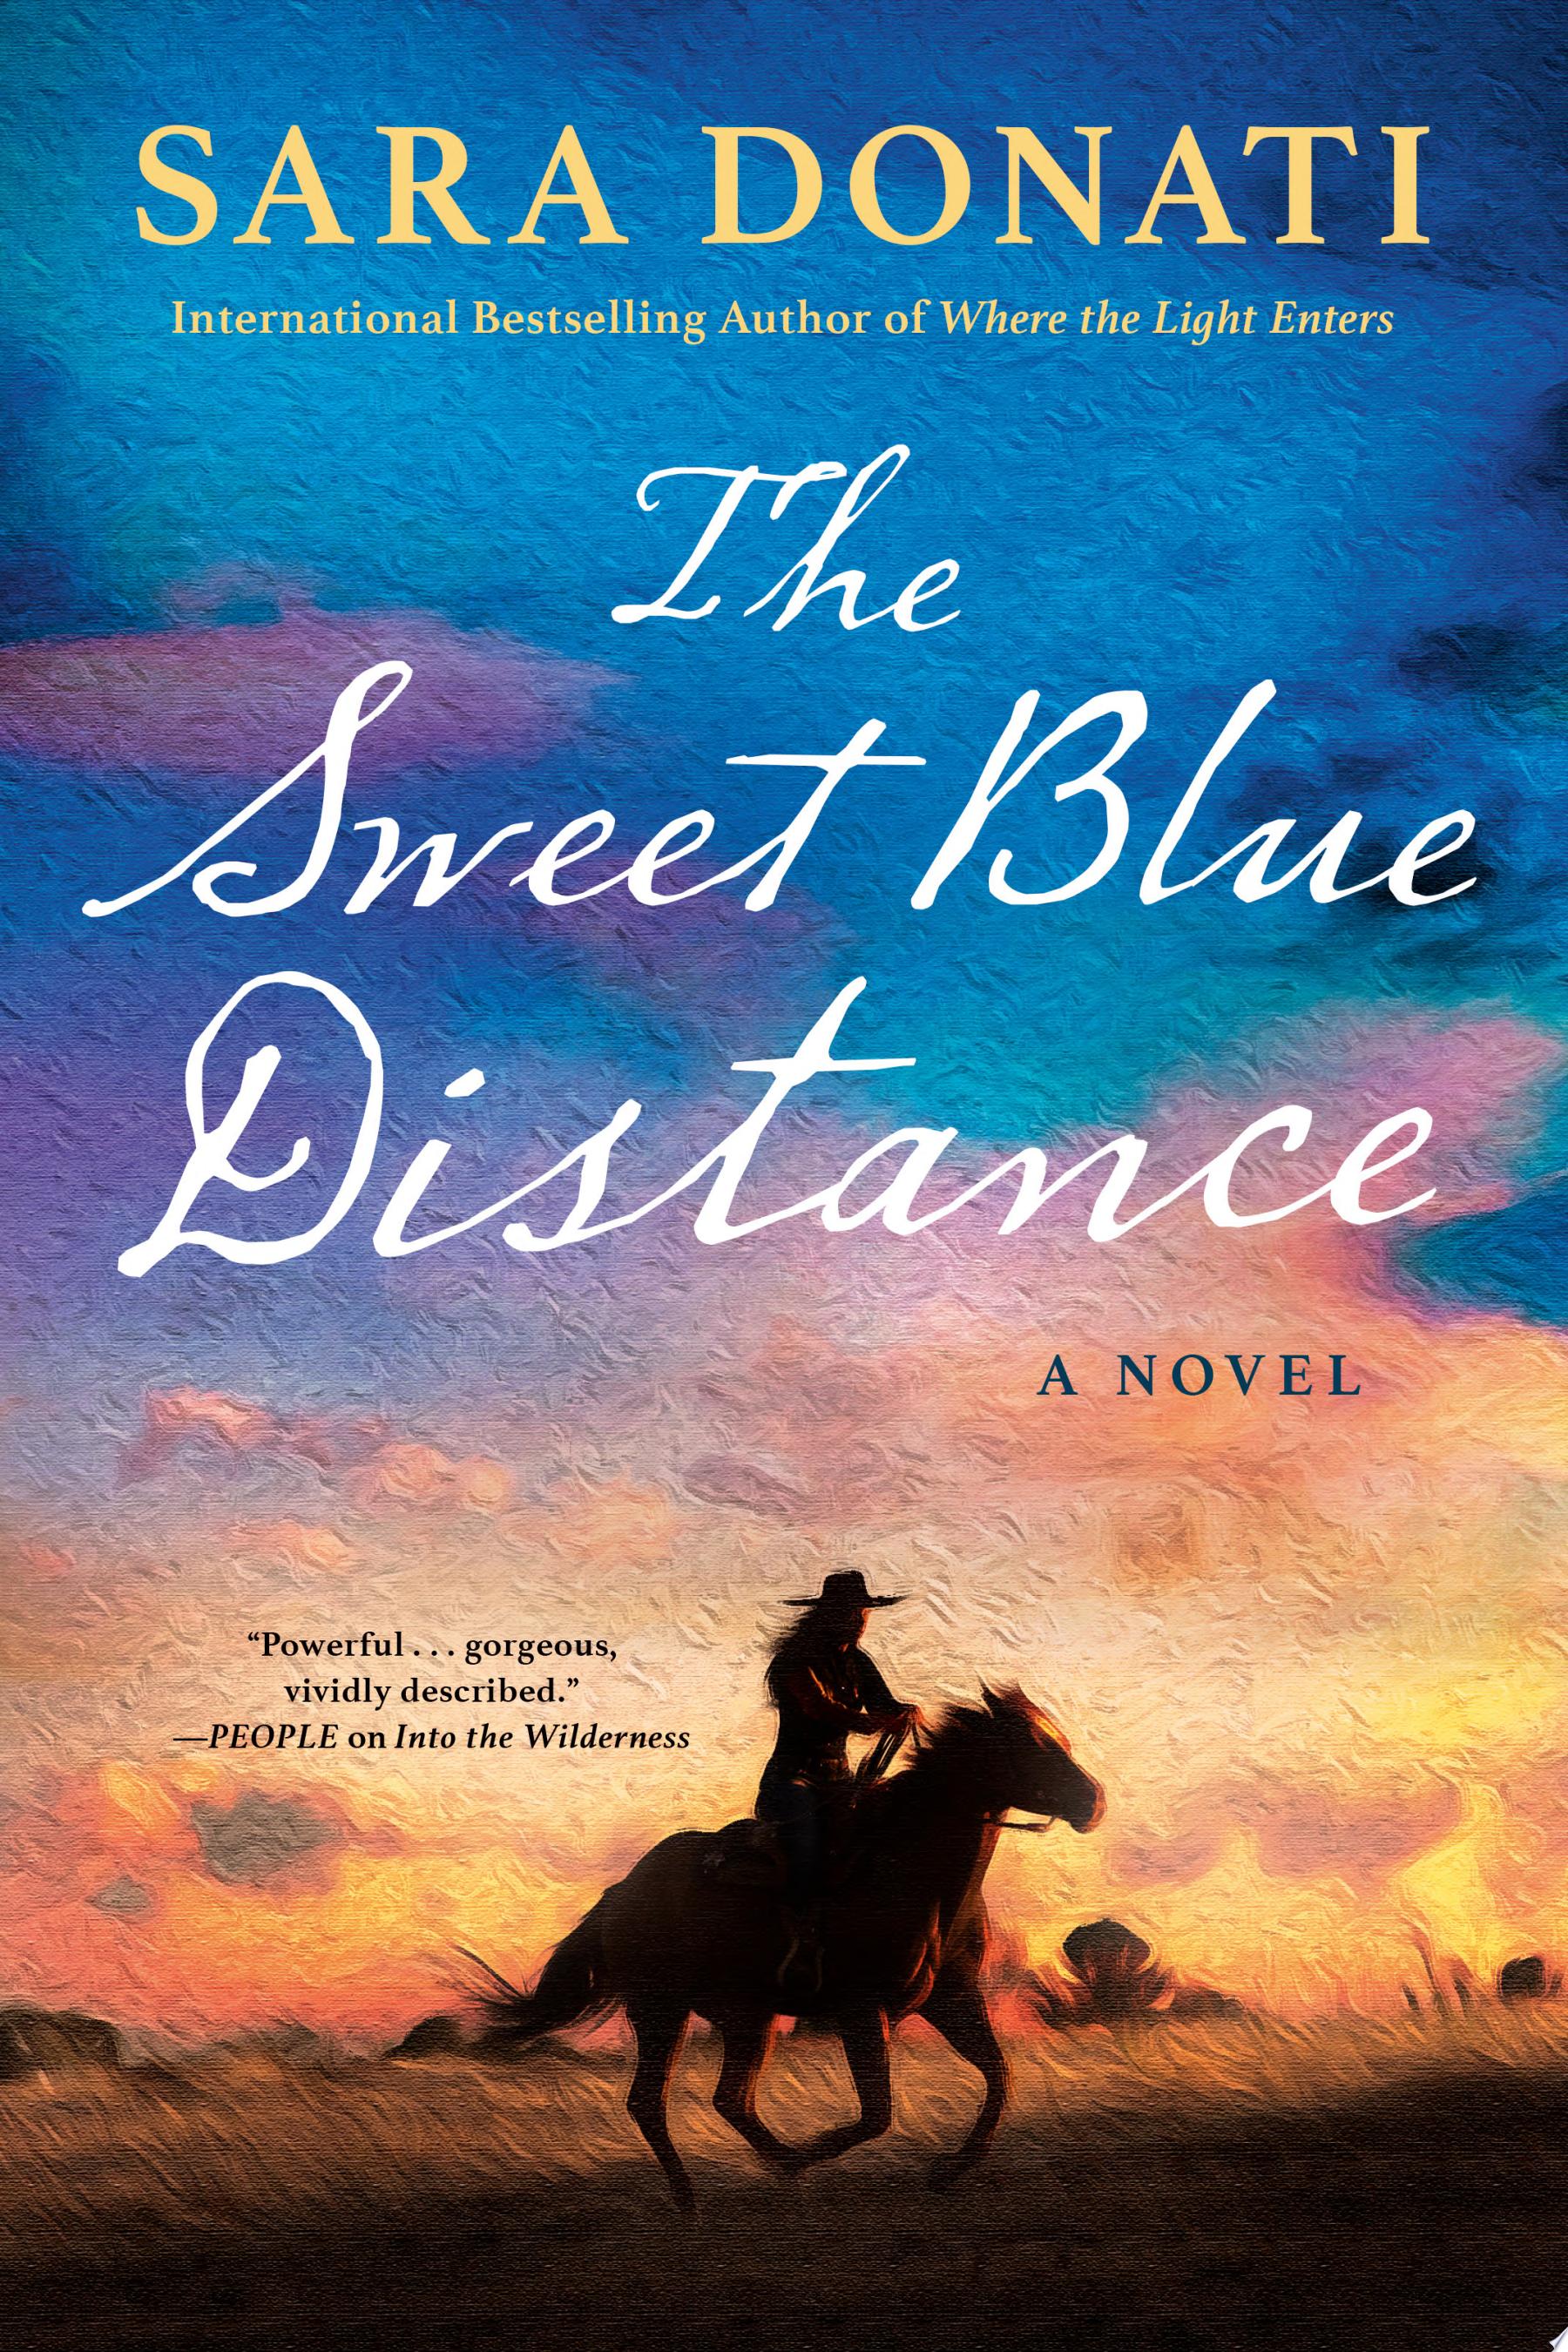 Image for "The Sweet Blue Distance"